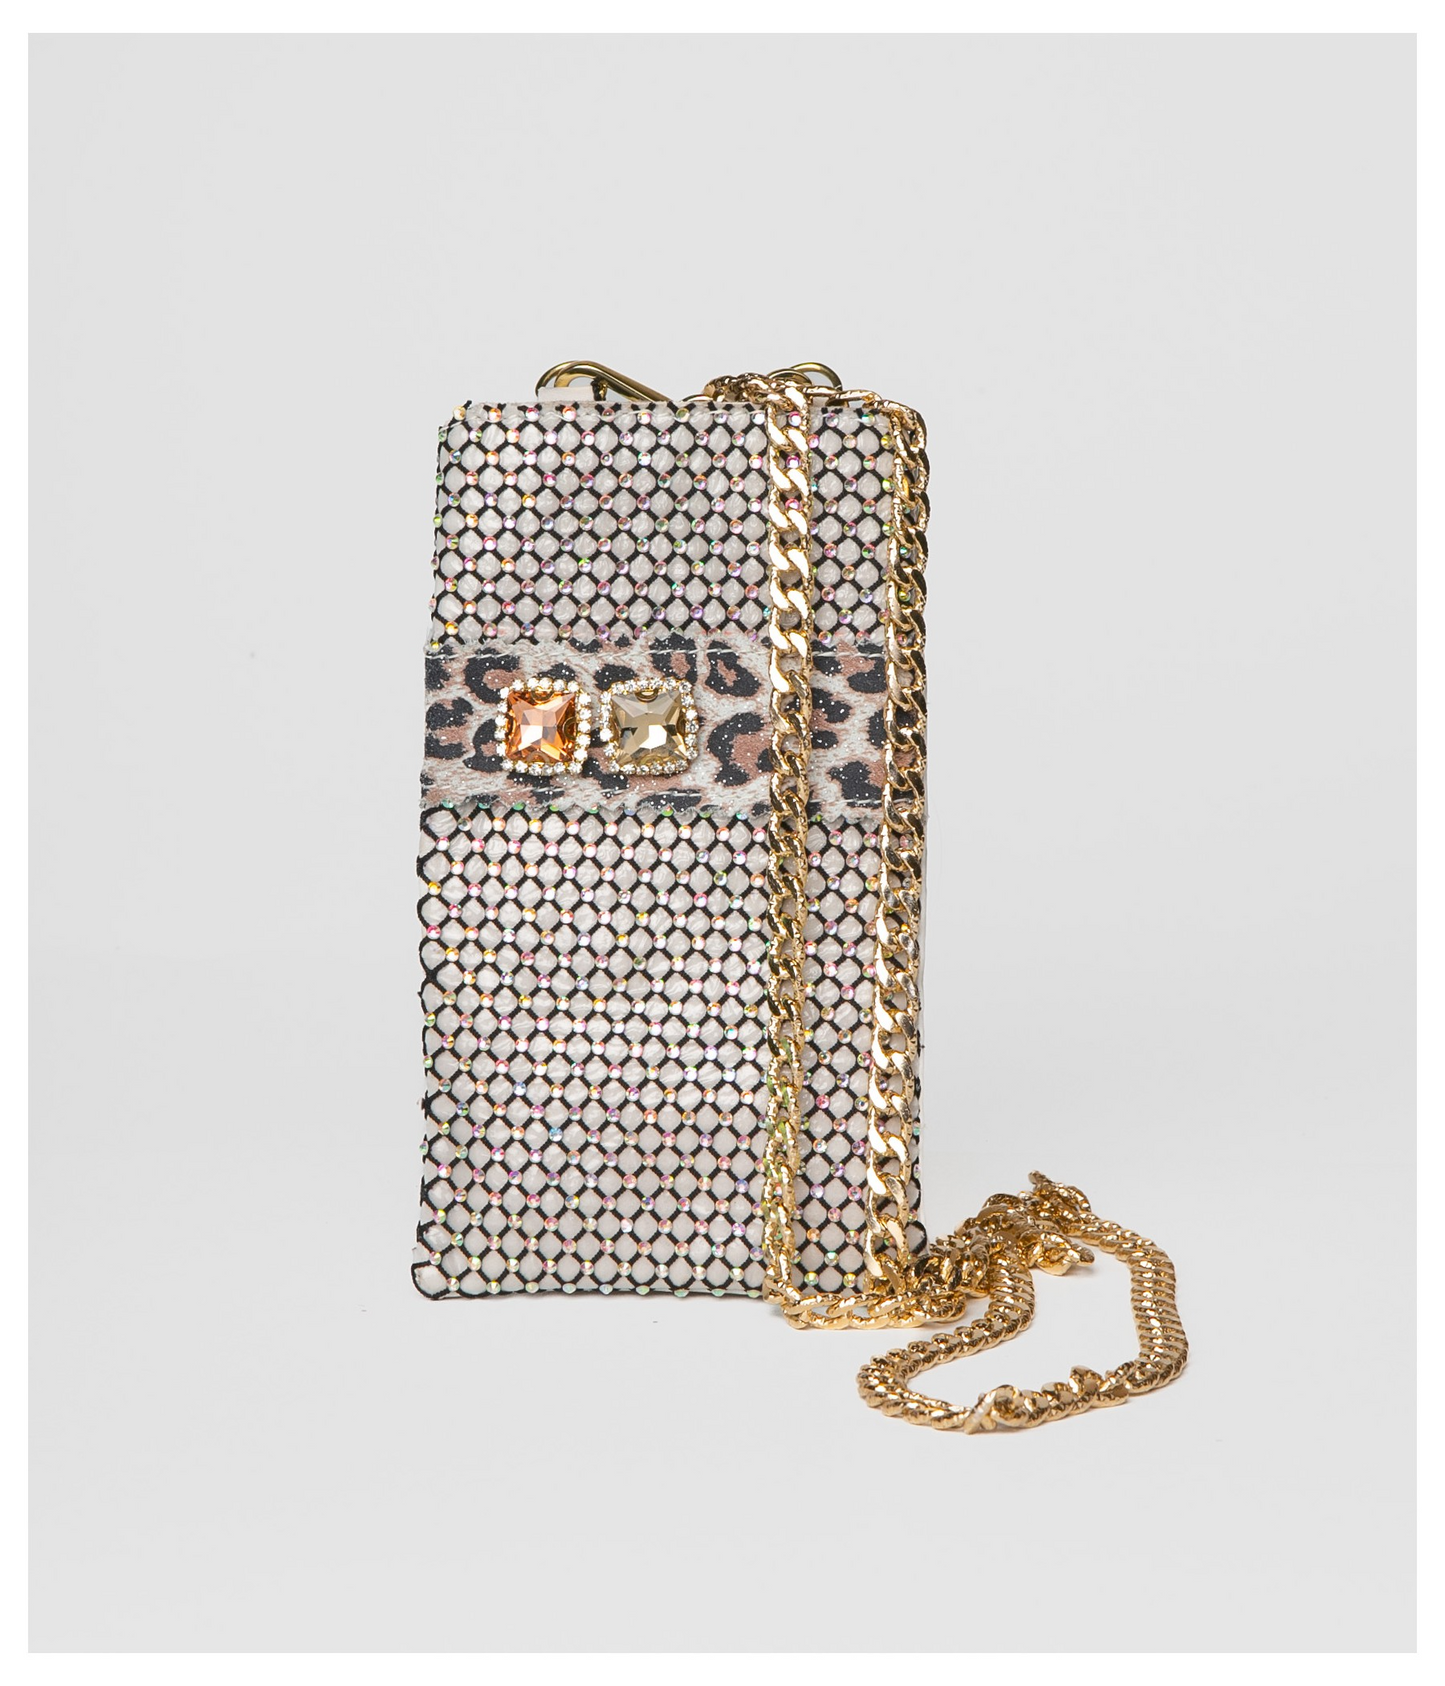 JENNY CRYSTAL MESH SMARTPHONE POUCH WITH RHINESTONES - BEIGE/BLACK